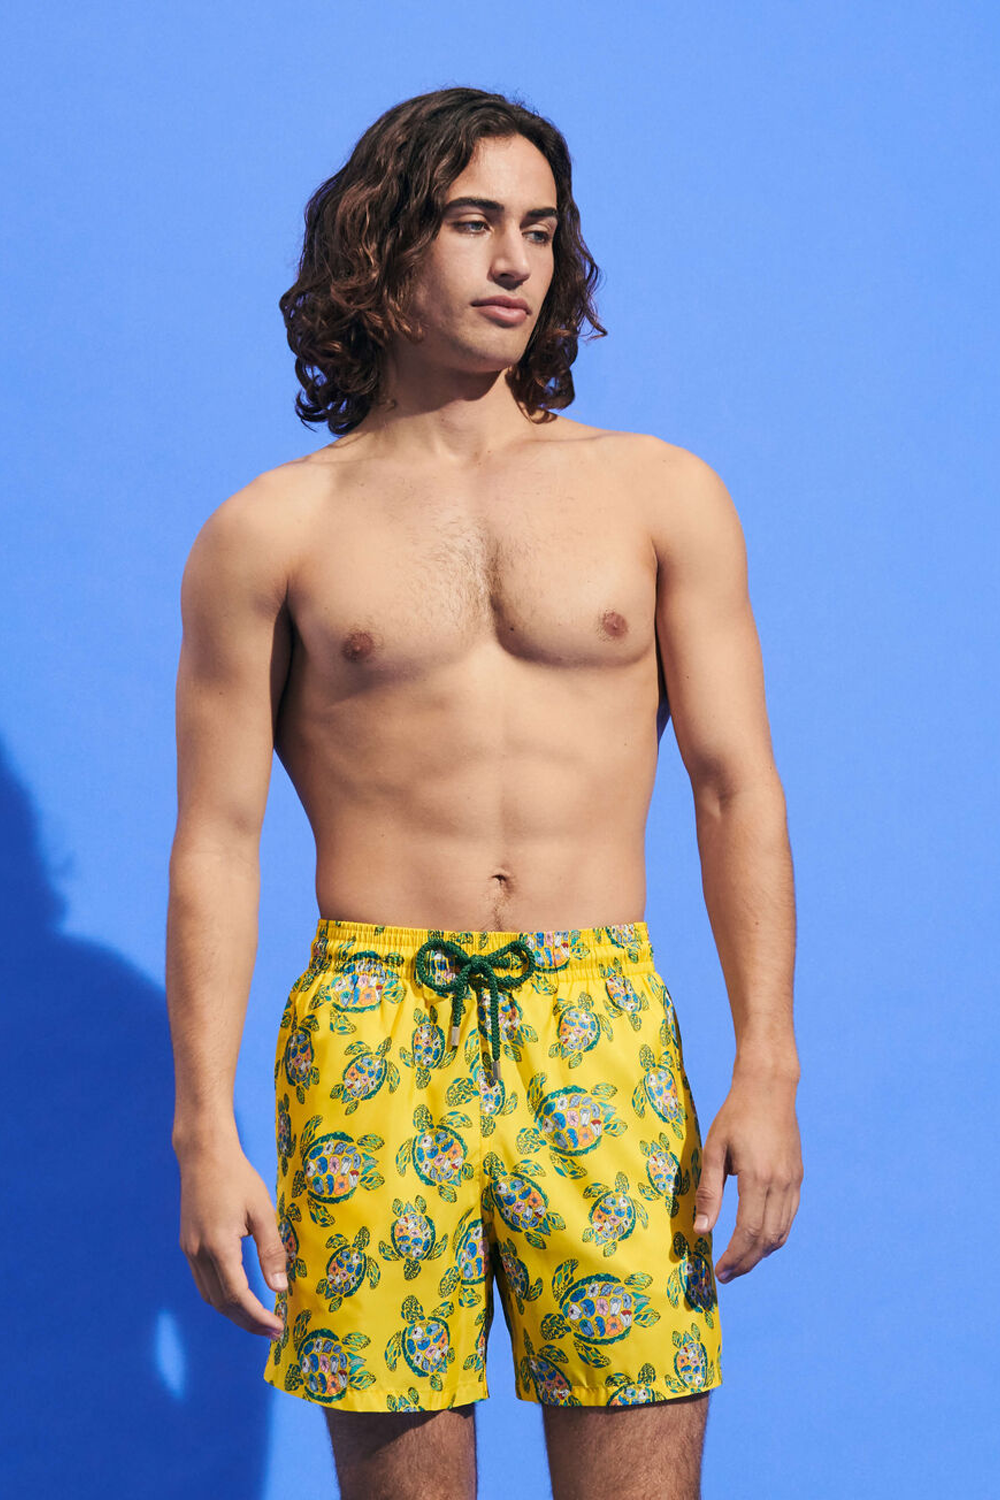 Buy the Vilebrequin Ultra-light Provencal Turtles Swimshorts in Yellow at Intro. Spend £50 for free UK delivery. Official stockists. We ship worldwide.